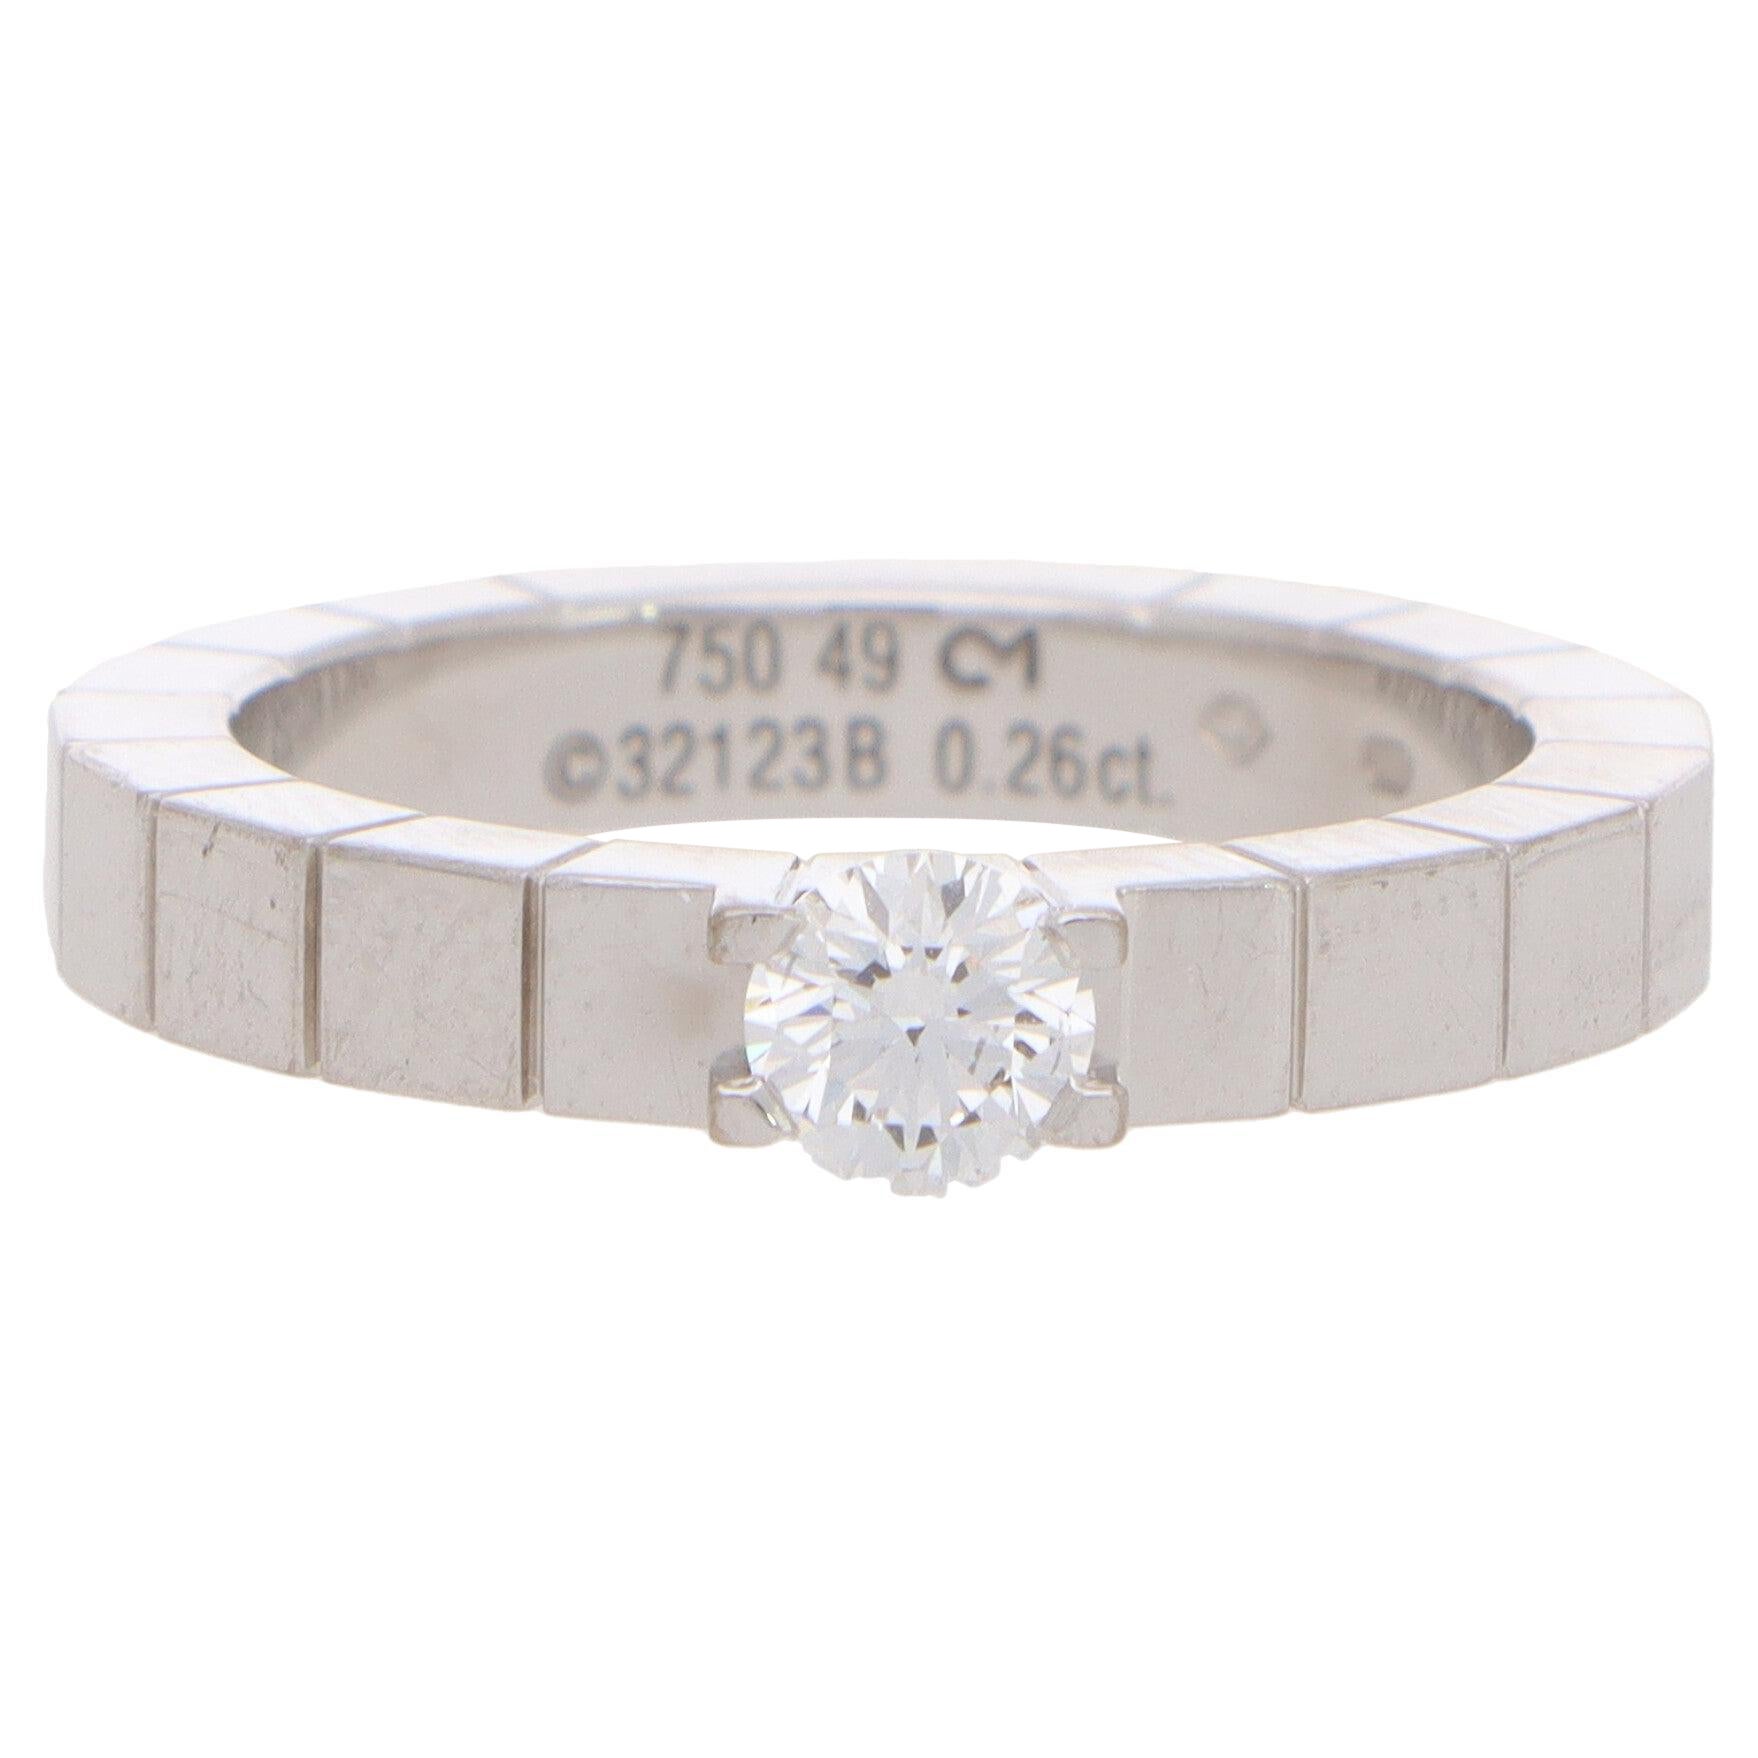 Certified Vintage Cartier Lanières Solitaire Diamond Ring Set in 18k White Gold